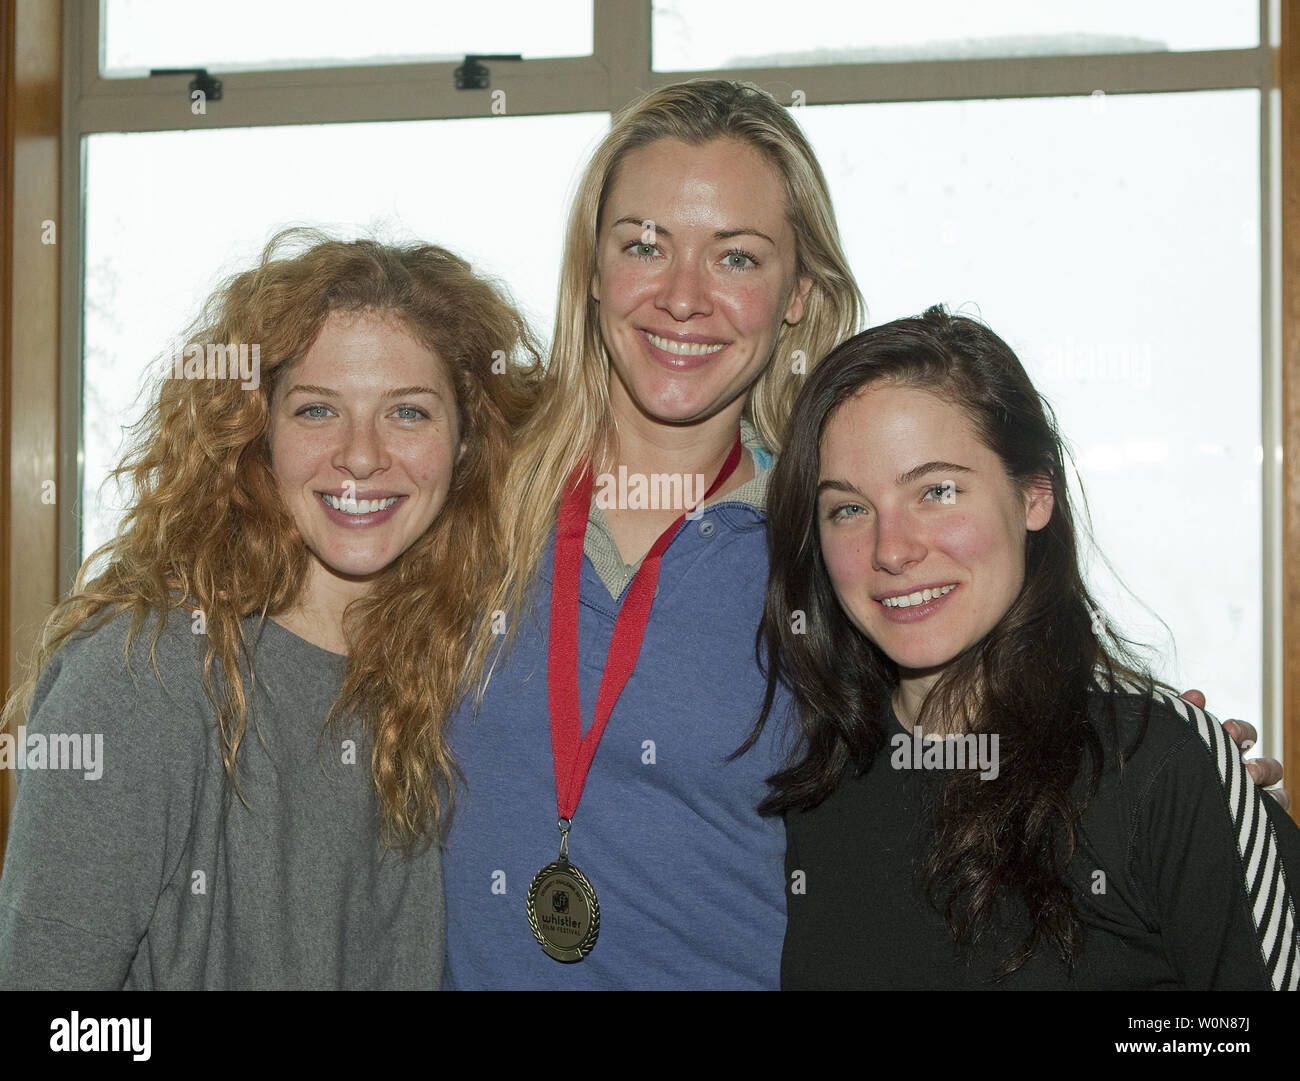 Actors Rachelle Lefevre (L) and Caroline Dhavernas (R) congratulate fellow actress and producer Kristanna Loken (centre), who's team 'Scar Tissue' finished with the best combined time in the Celebrity Challenge Ski Race during the awards luncheon at Steeps Grill atop Whistler Mountain in Whistler, British Columbia, December 1, 2012 during the 2012 Whistler Film Festival.     UPI Photo /Heinz Ruckemann Stock Photo